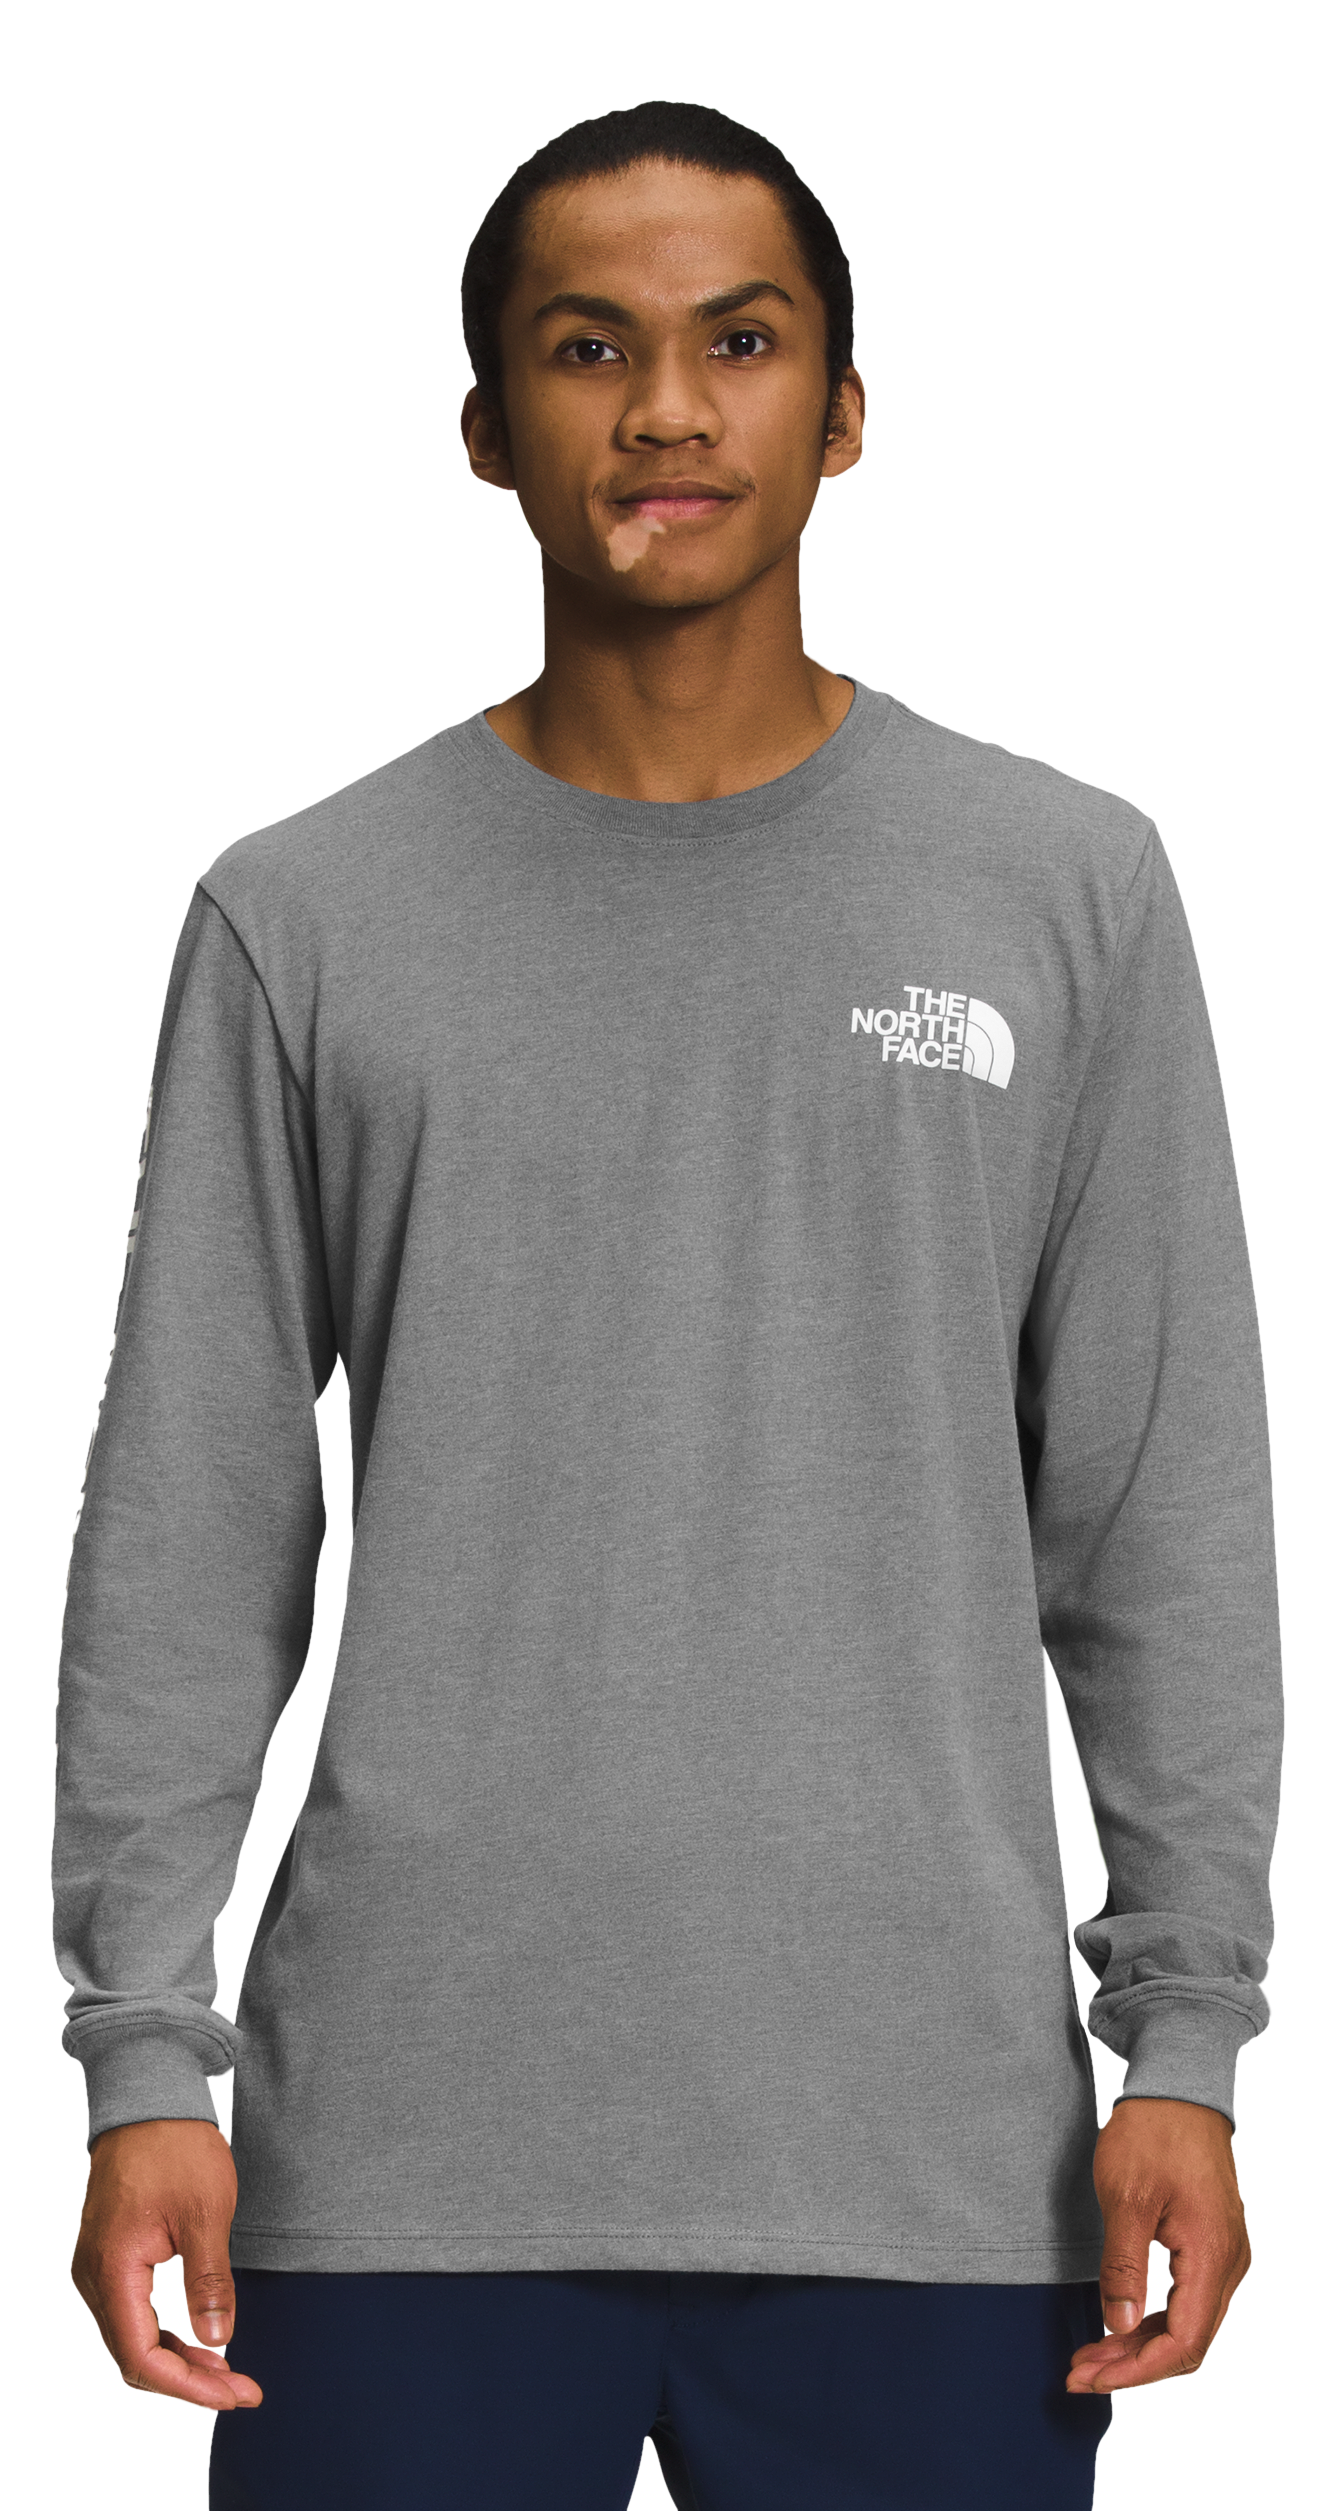 The North Face TNF Sleeve Hit Long-Sleeve T-Shirt for Men